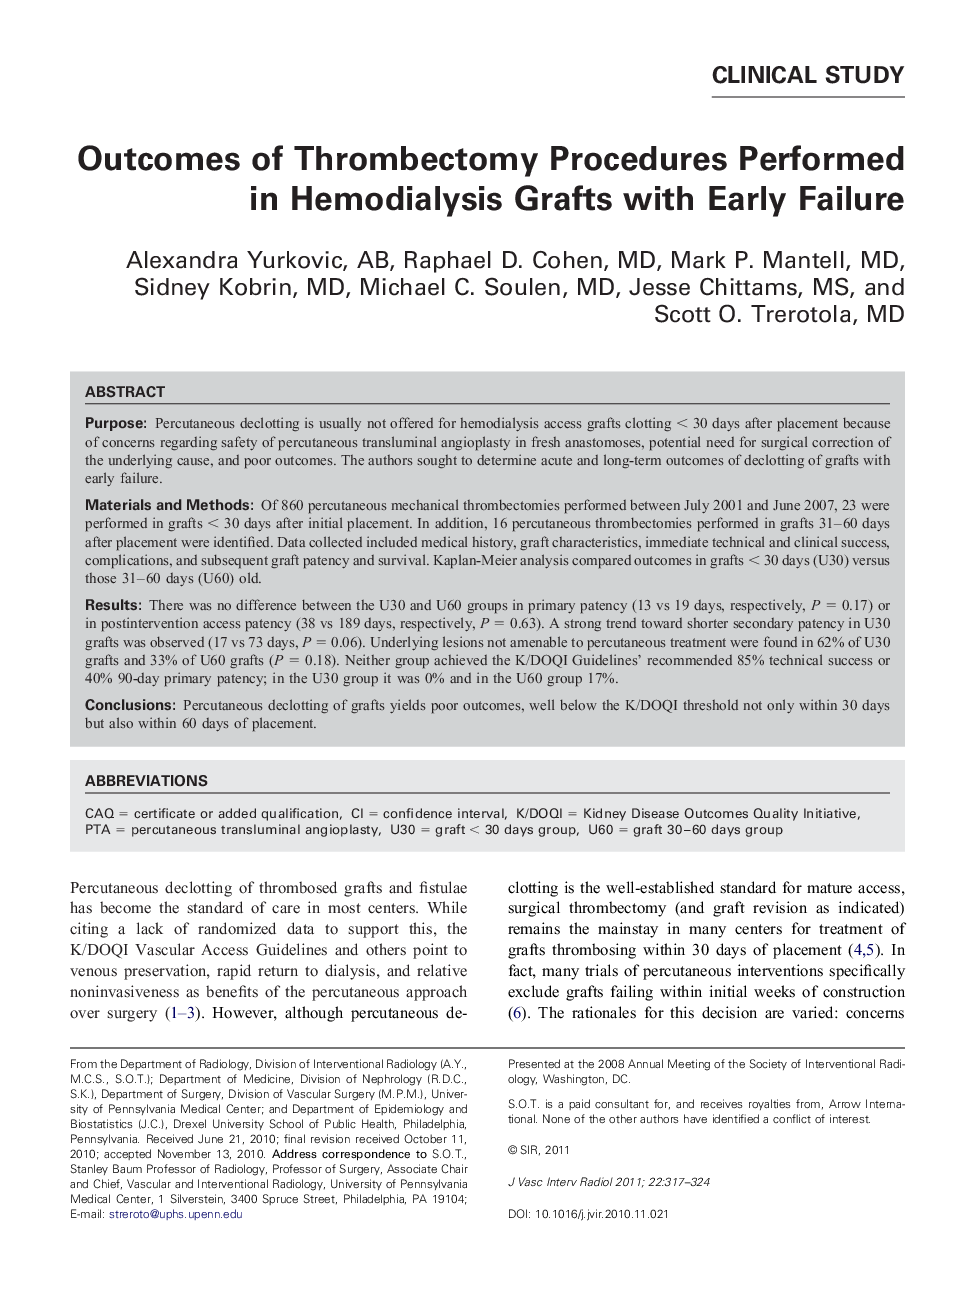 Outcomes of Thrombectomy Procedures Performed in Hemodialysis Grafts with Early Failure